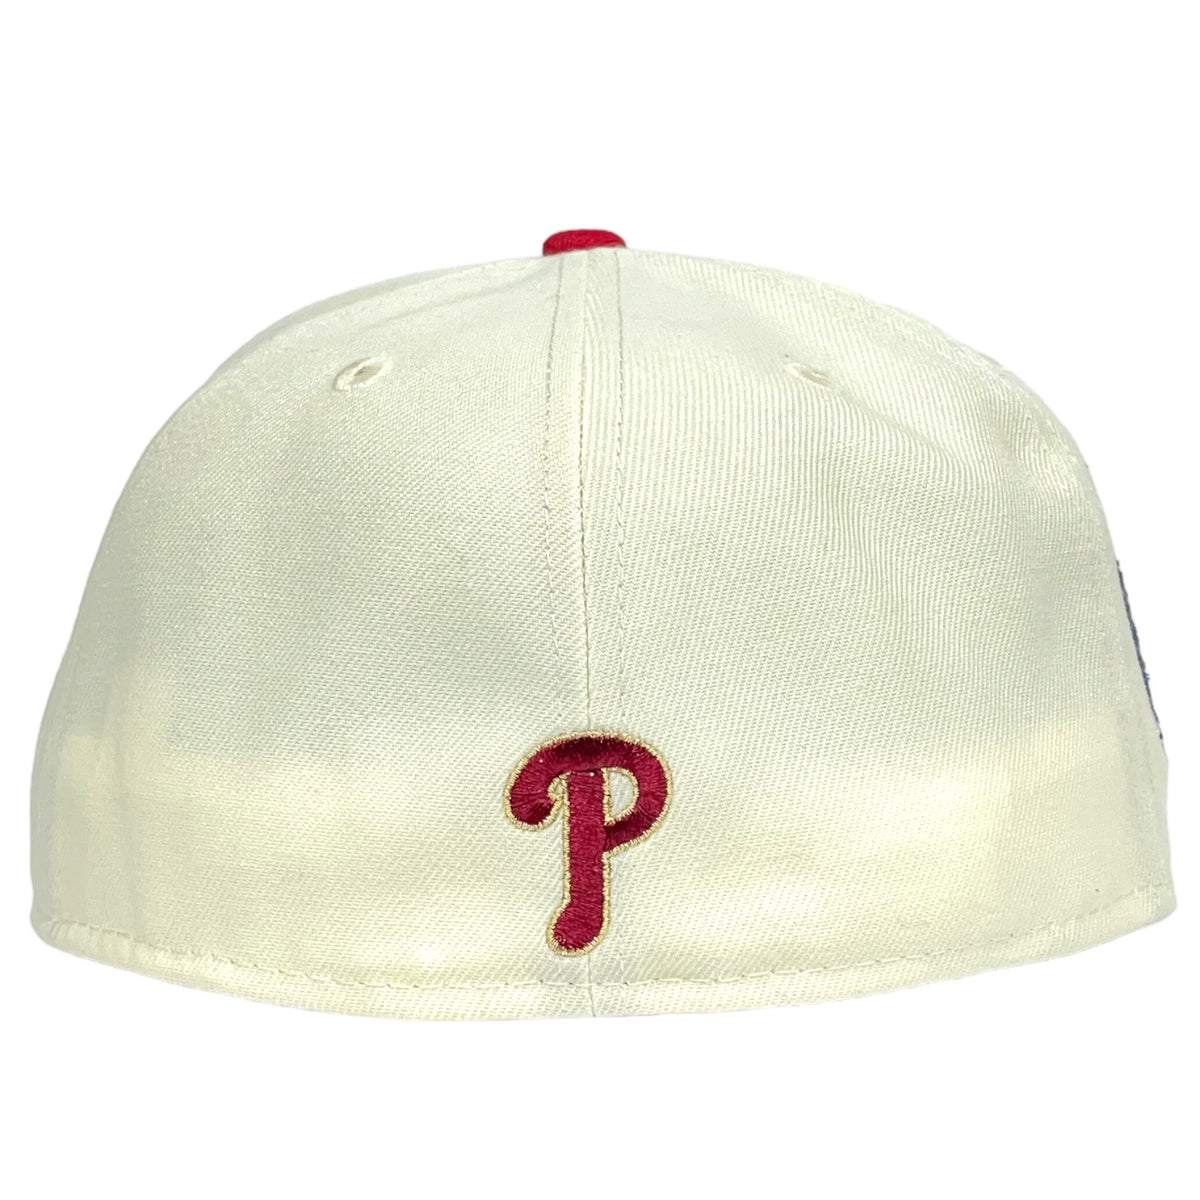 Phanatic Scatter hat : r/phillies